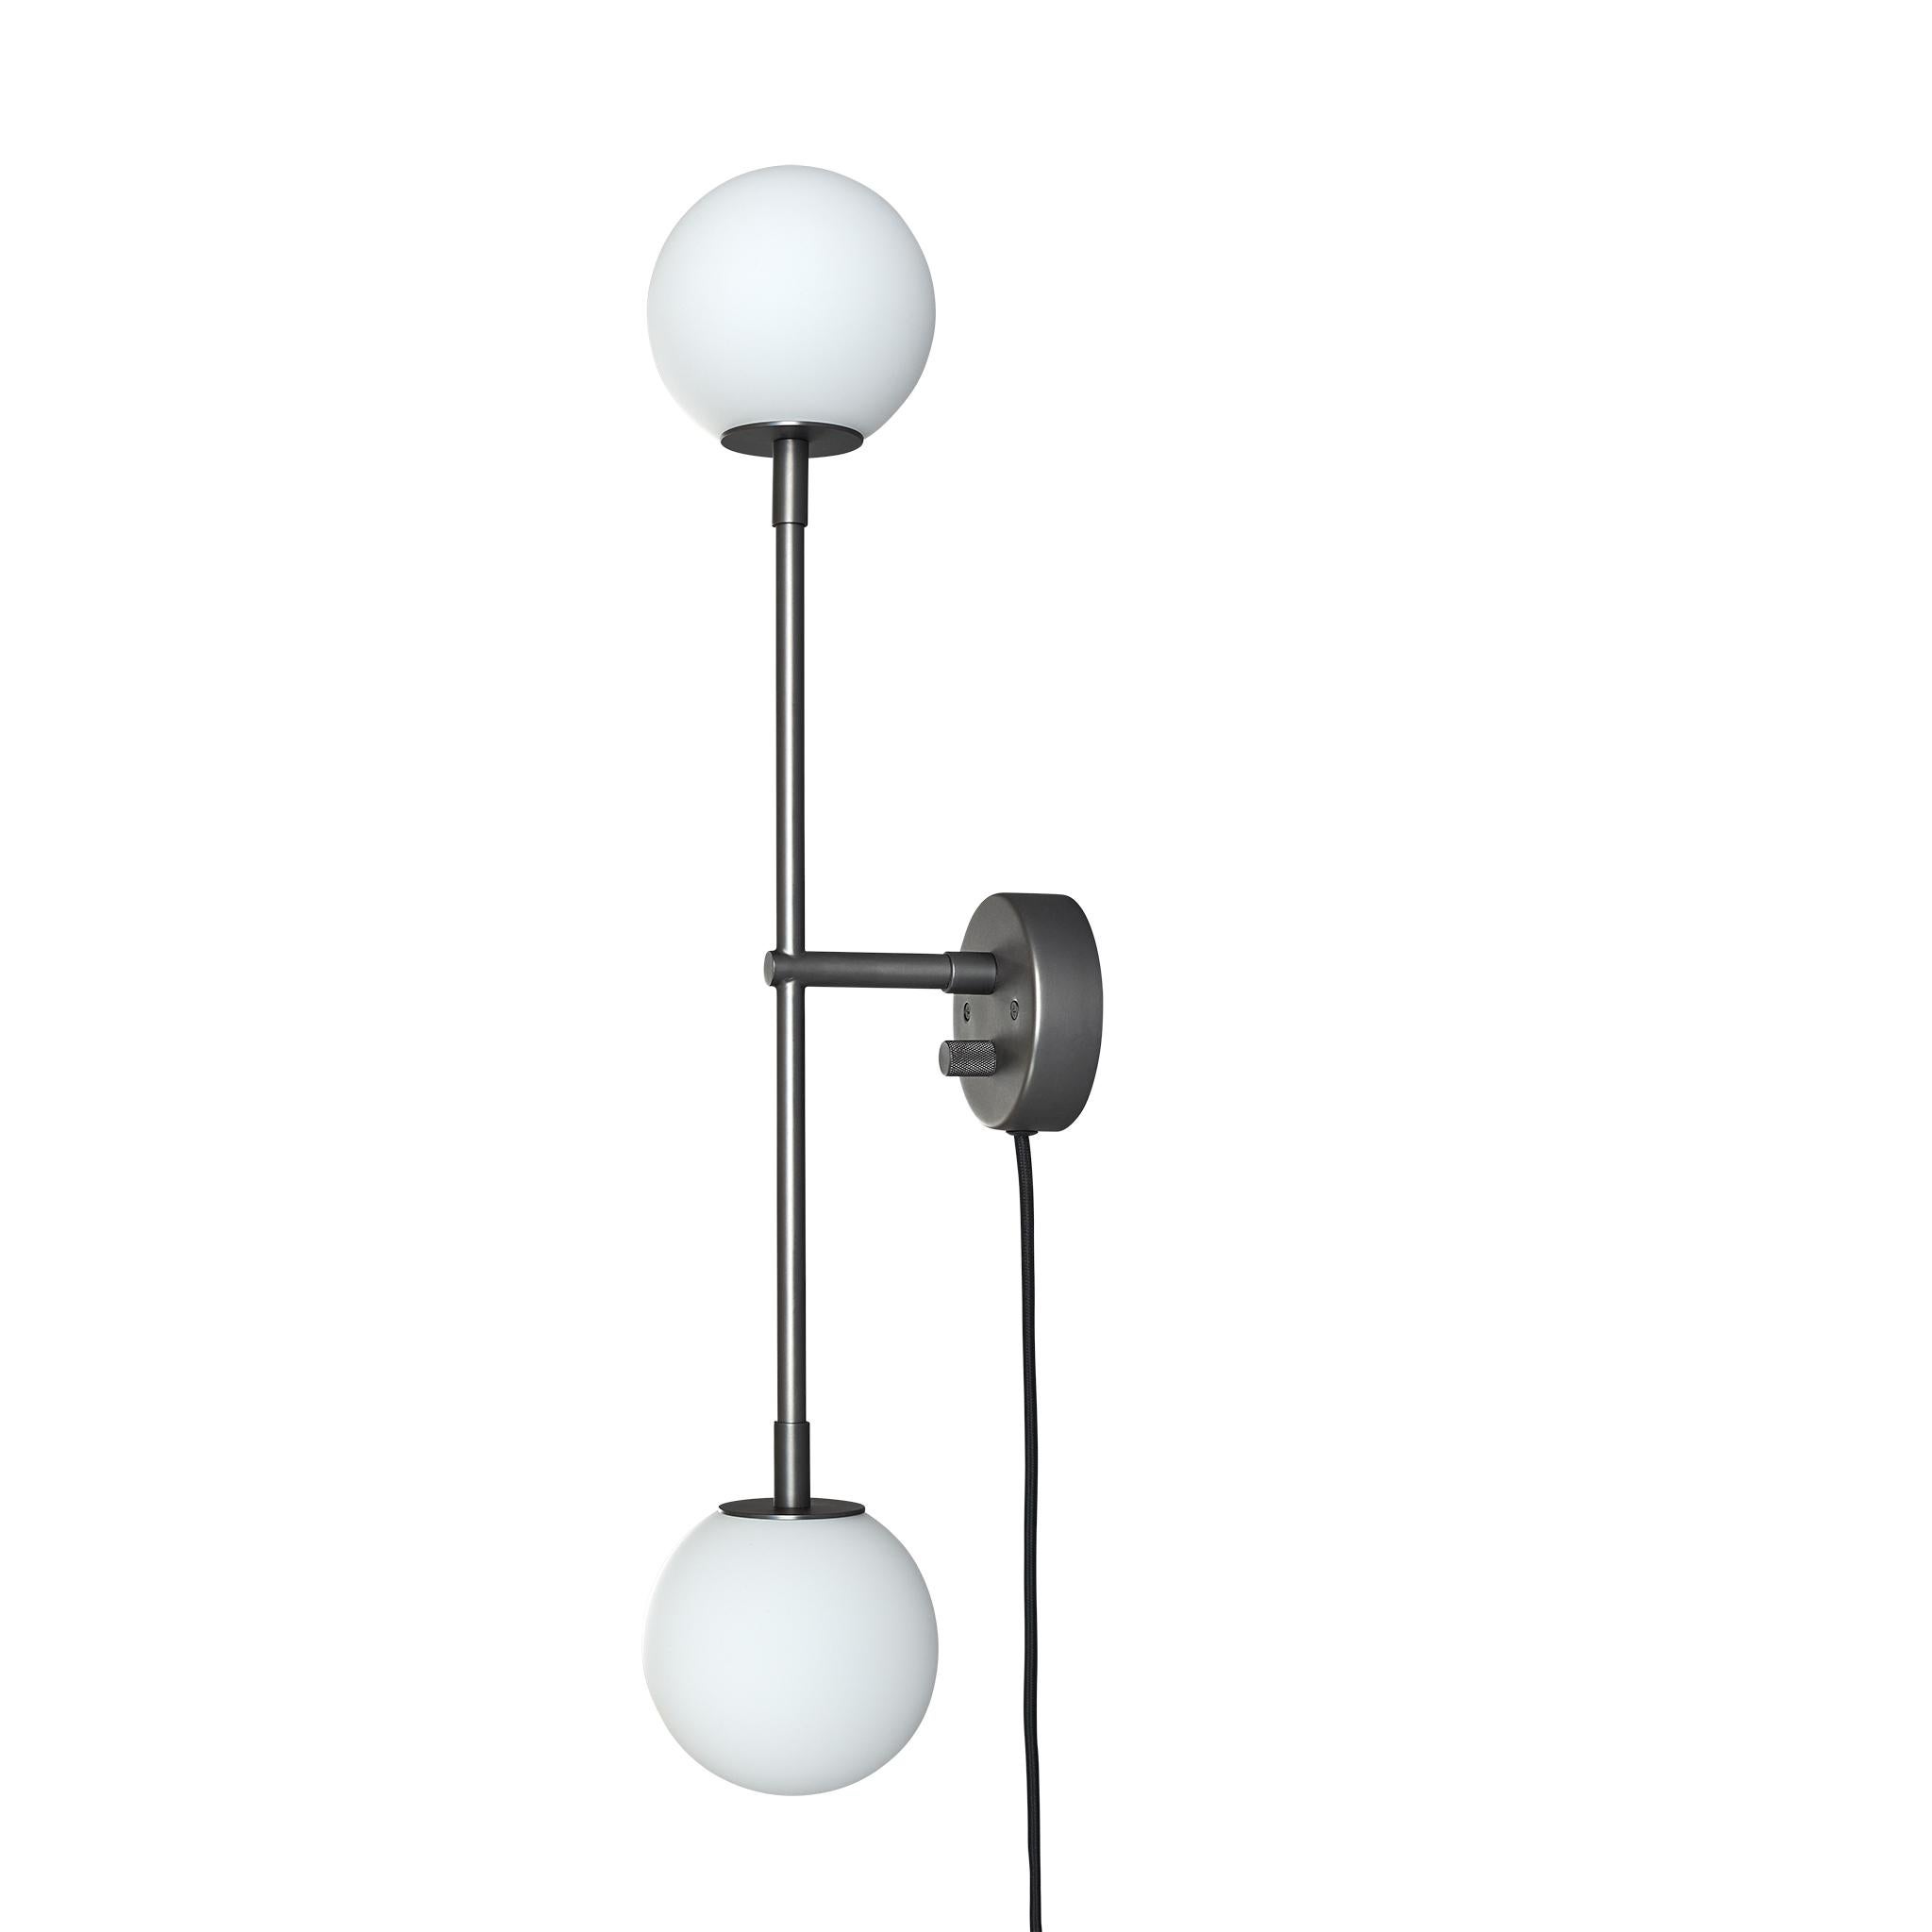 Drop wall lamp Bulp by 101 Copenhagen
Designed by Kristian Sofus Hansen & Tommy Hyldahl.
Dimensions: L 18 x W 18 x H 66 cm
Cable length: 160 cm
Materials: Metal: Plated metal / Grey
Opal glass / White
Cable: Fabric covered cable / Black
This product